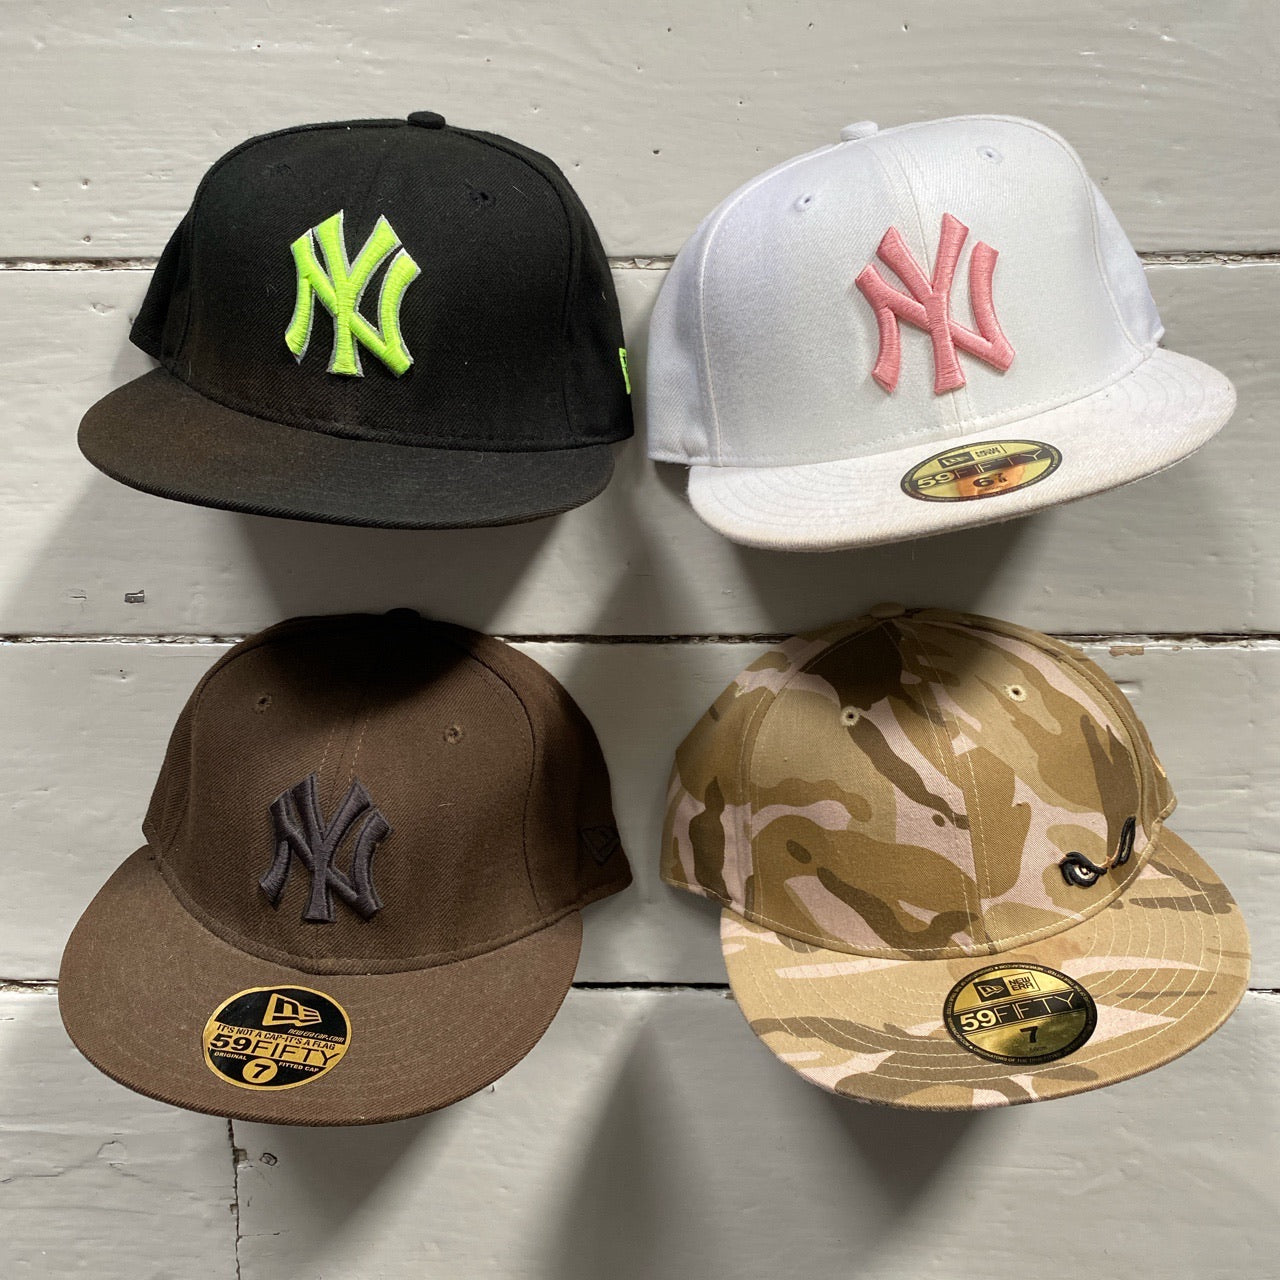 New Era Yankees and Storm 59Fifty Caps